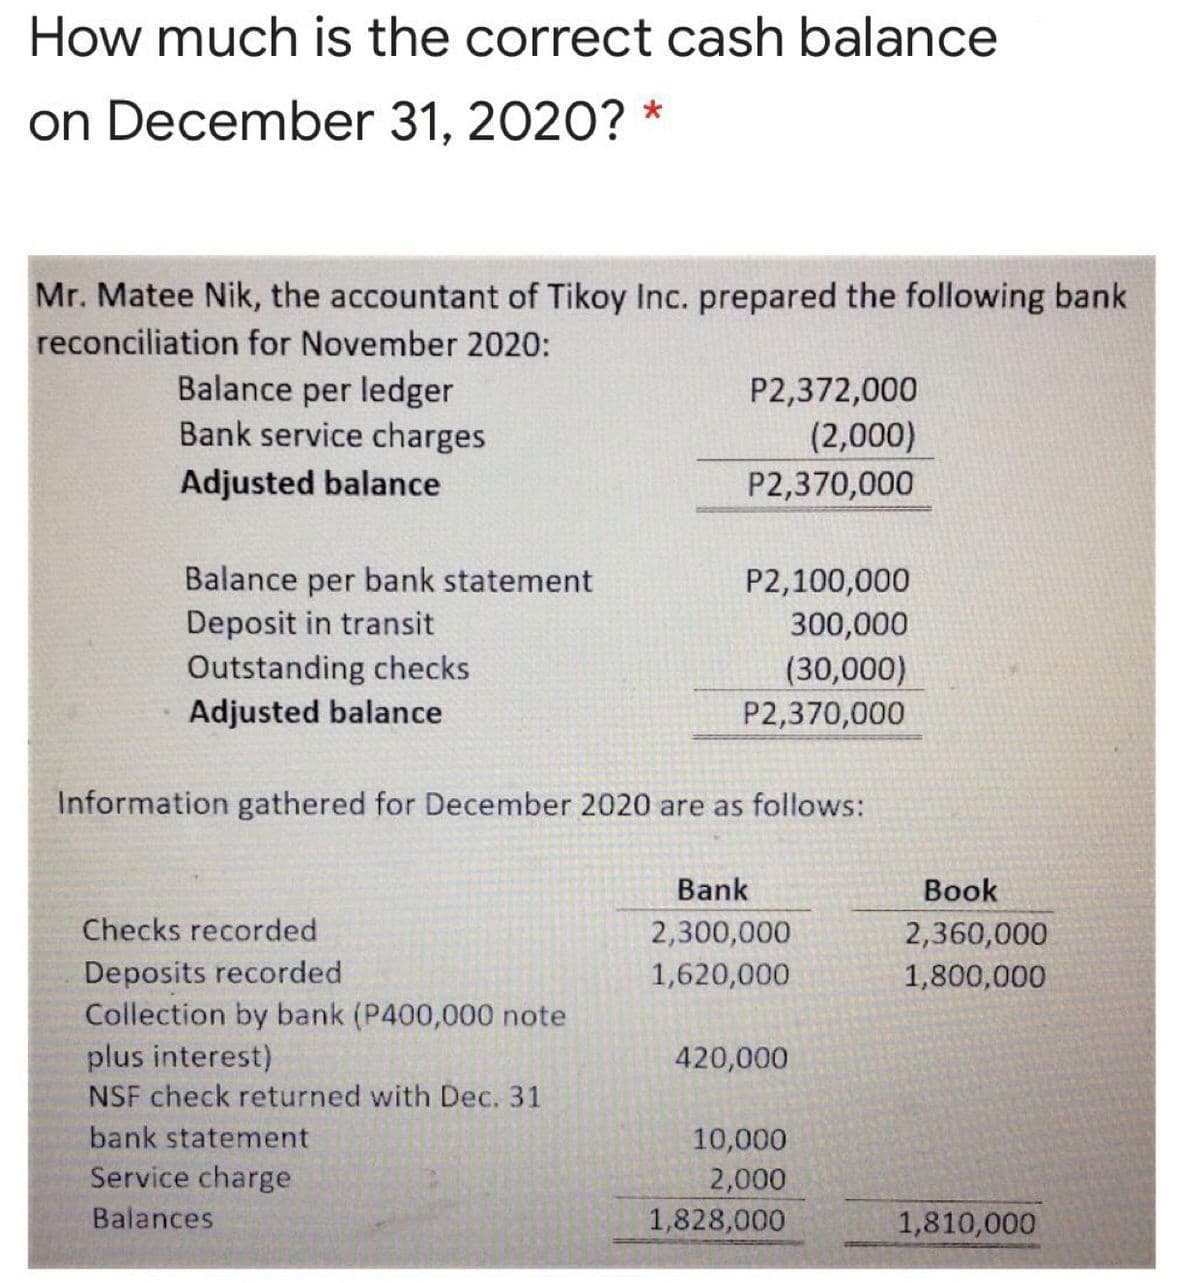 How much is the correct cash balance
on December 31, 2020? *
Mr. Matee Nik, the accountant of Tikoy Inc. prepared the following bank
reconciliation for November 2020:
Balance per ledger
Bank service charges
P2,372,000
(2,000)
Adjusted balance
P2,370,000
Balance per bank statement
P2,100,000
Deposit in transit
300,000
Outstanding checks
Adjusted balance
(30,000)
P2,370,000
Information gathered for December 2020 are as follows:
Bank
Book
Checks recorded
2,300,000
2,360,000
Deposits recorded
Collection by bank (P400,000 note
plus interest)
NSF check returned with Dec. 31
1,620,000
1,800,000
420,000
bank statement
10,000
Service charge
2,000
Balances
1,828,000
1,810,000
